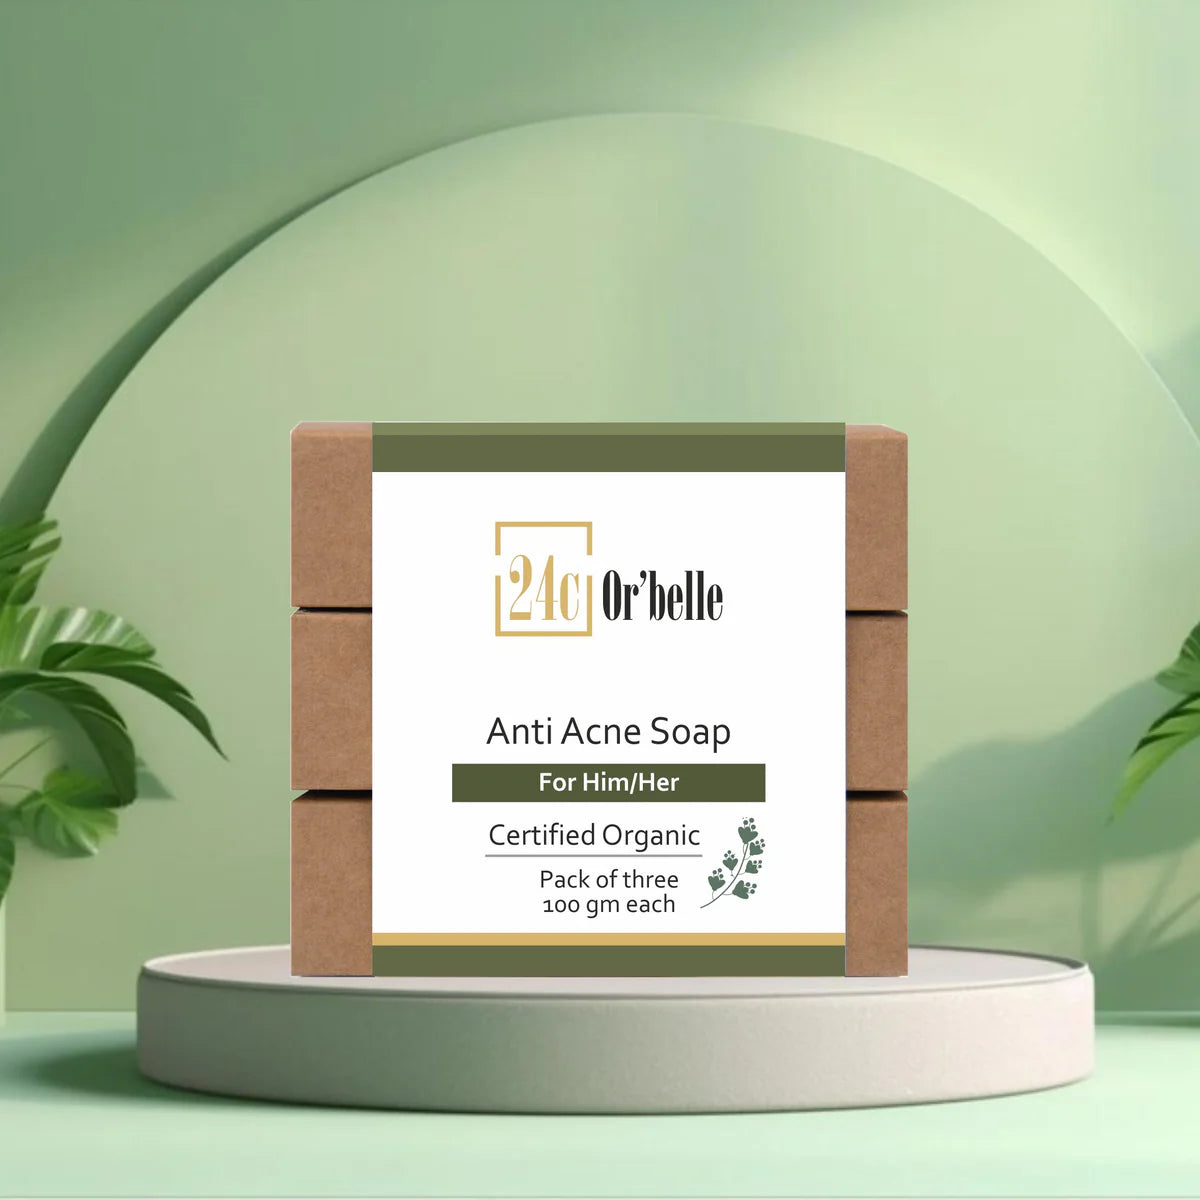 Radiant skin with anti acne soap